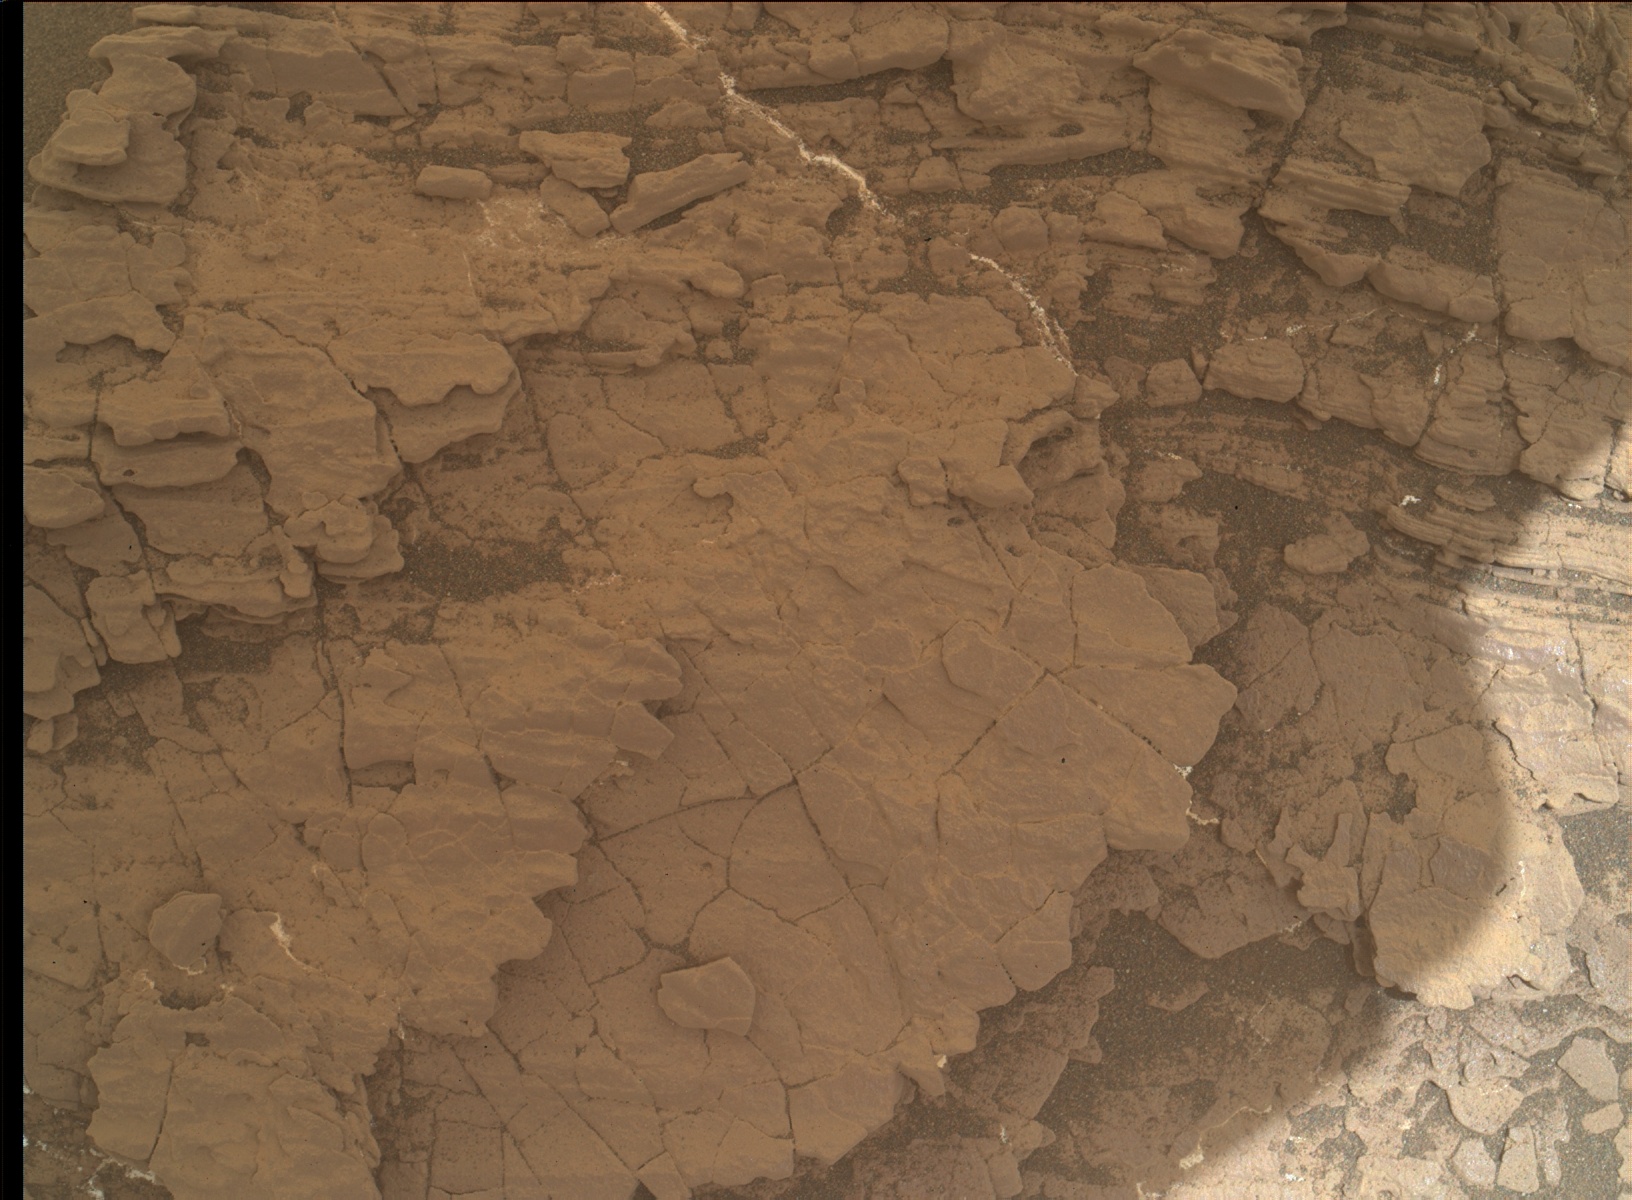 Nasa's Mars rover Curiosity acquired this image using its Mars Hand Lens Imager (MAHLI) on Sol 2454